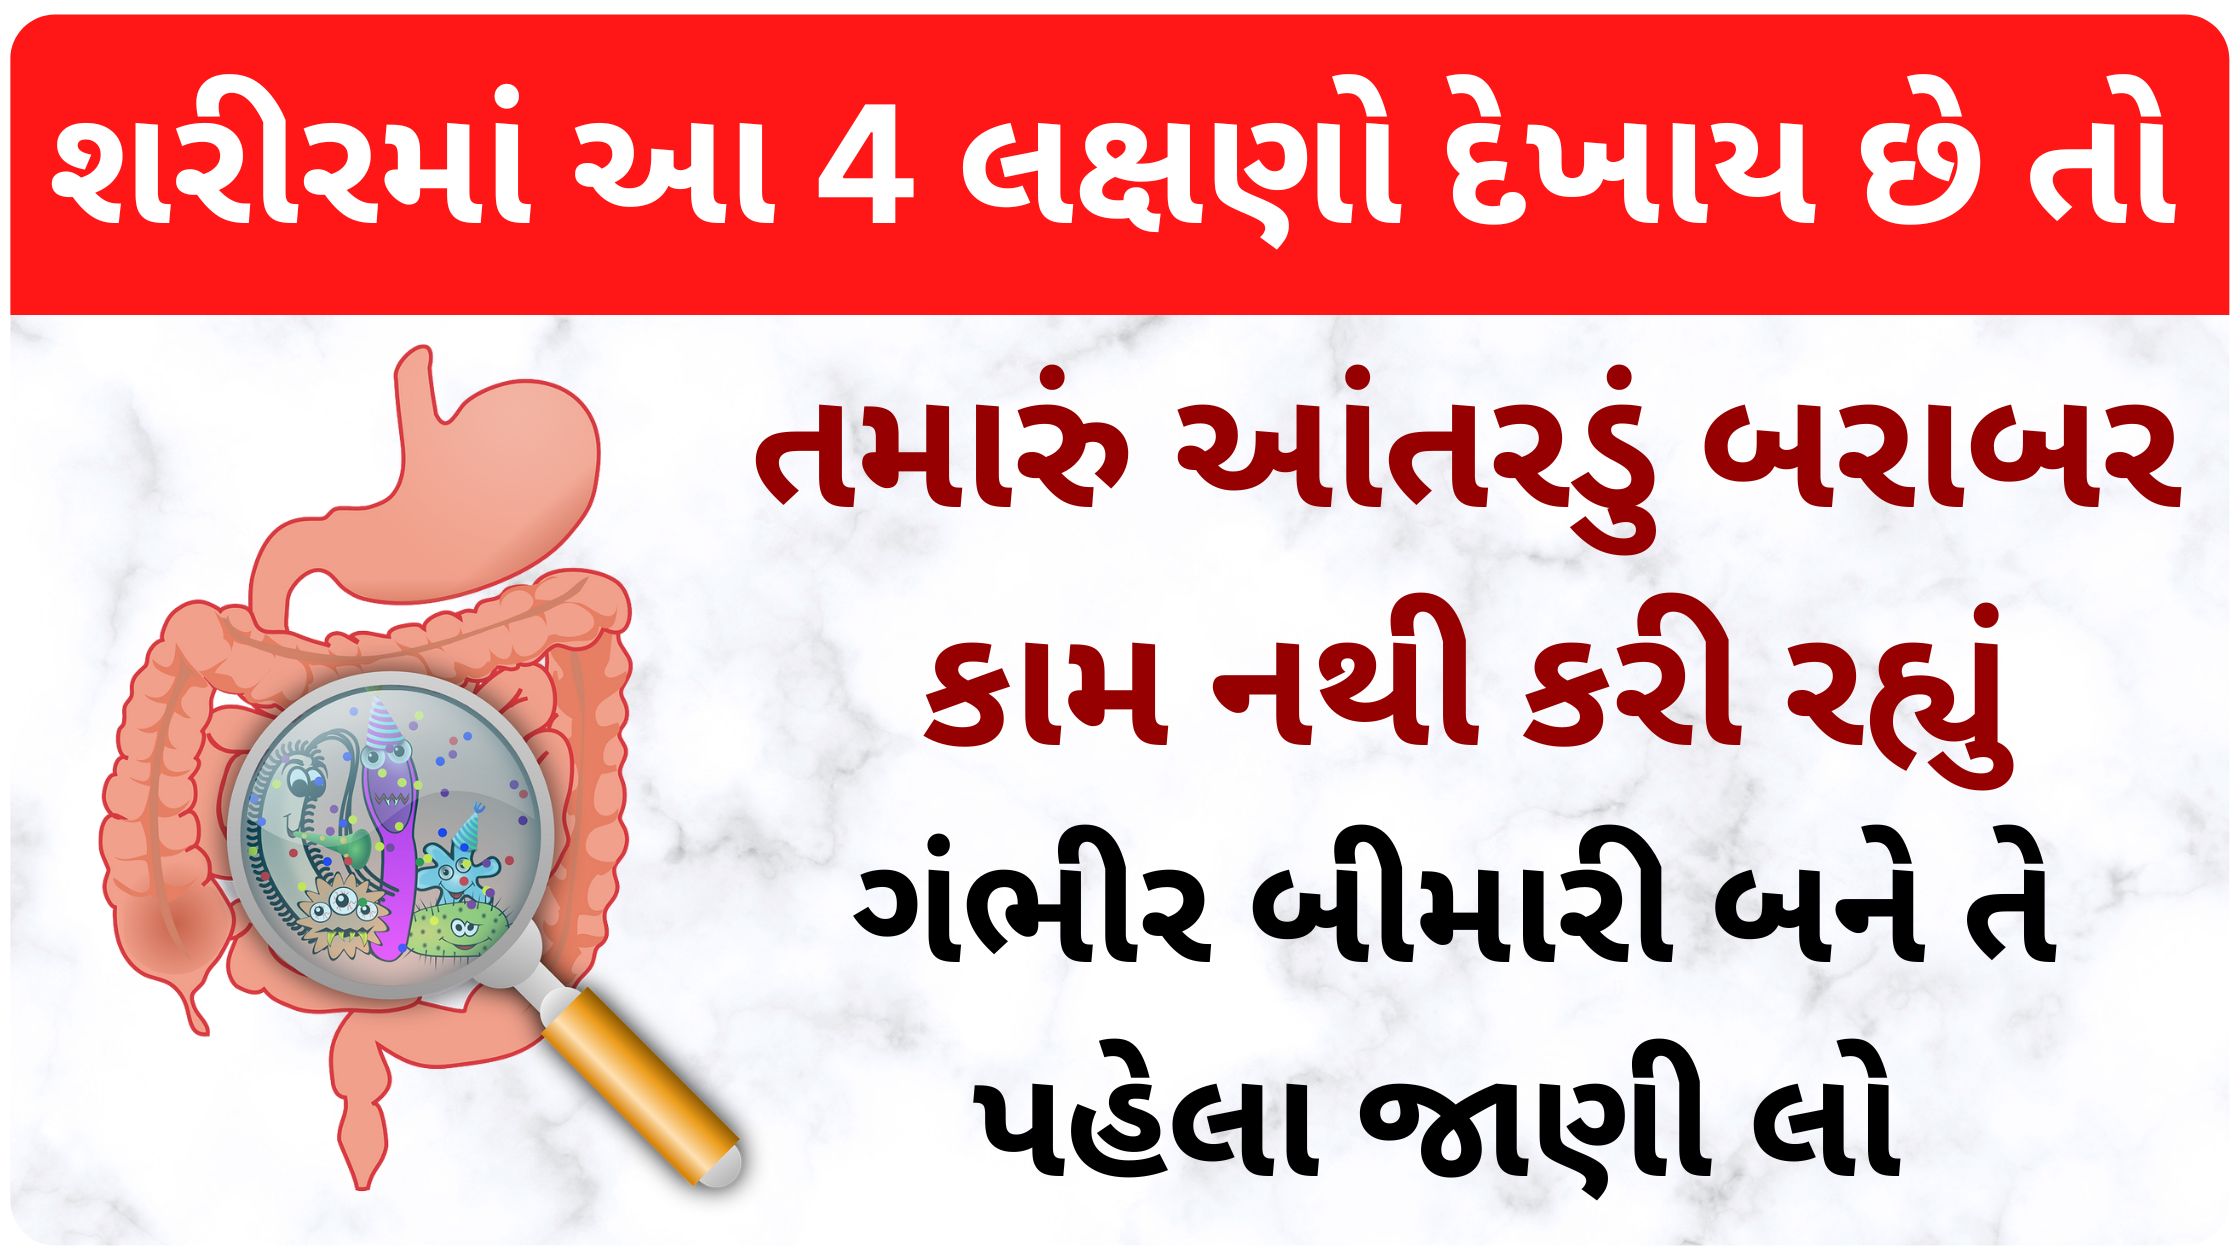 These 4 symptoms indicate that your intestine is not working properly